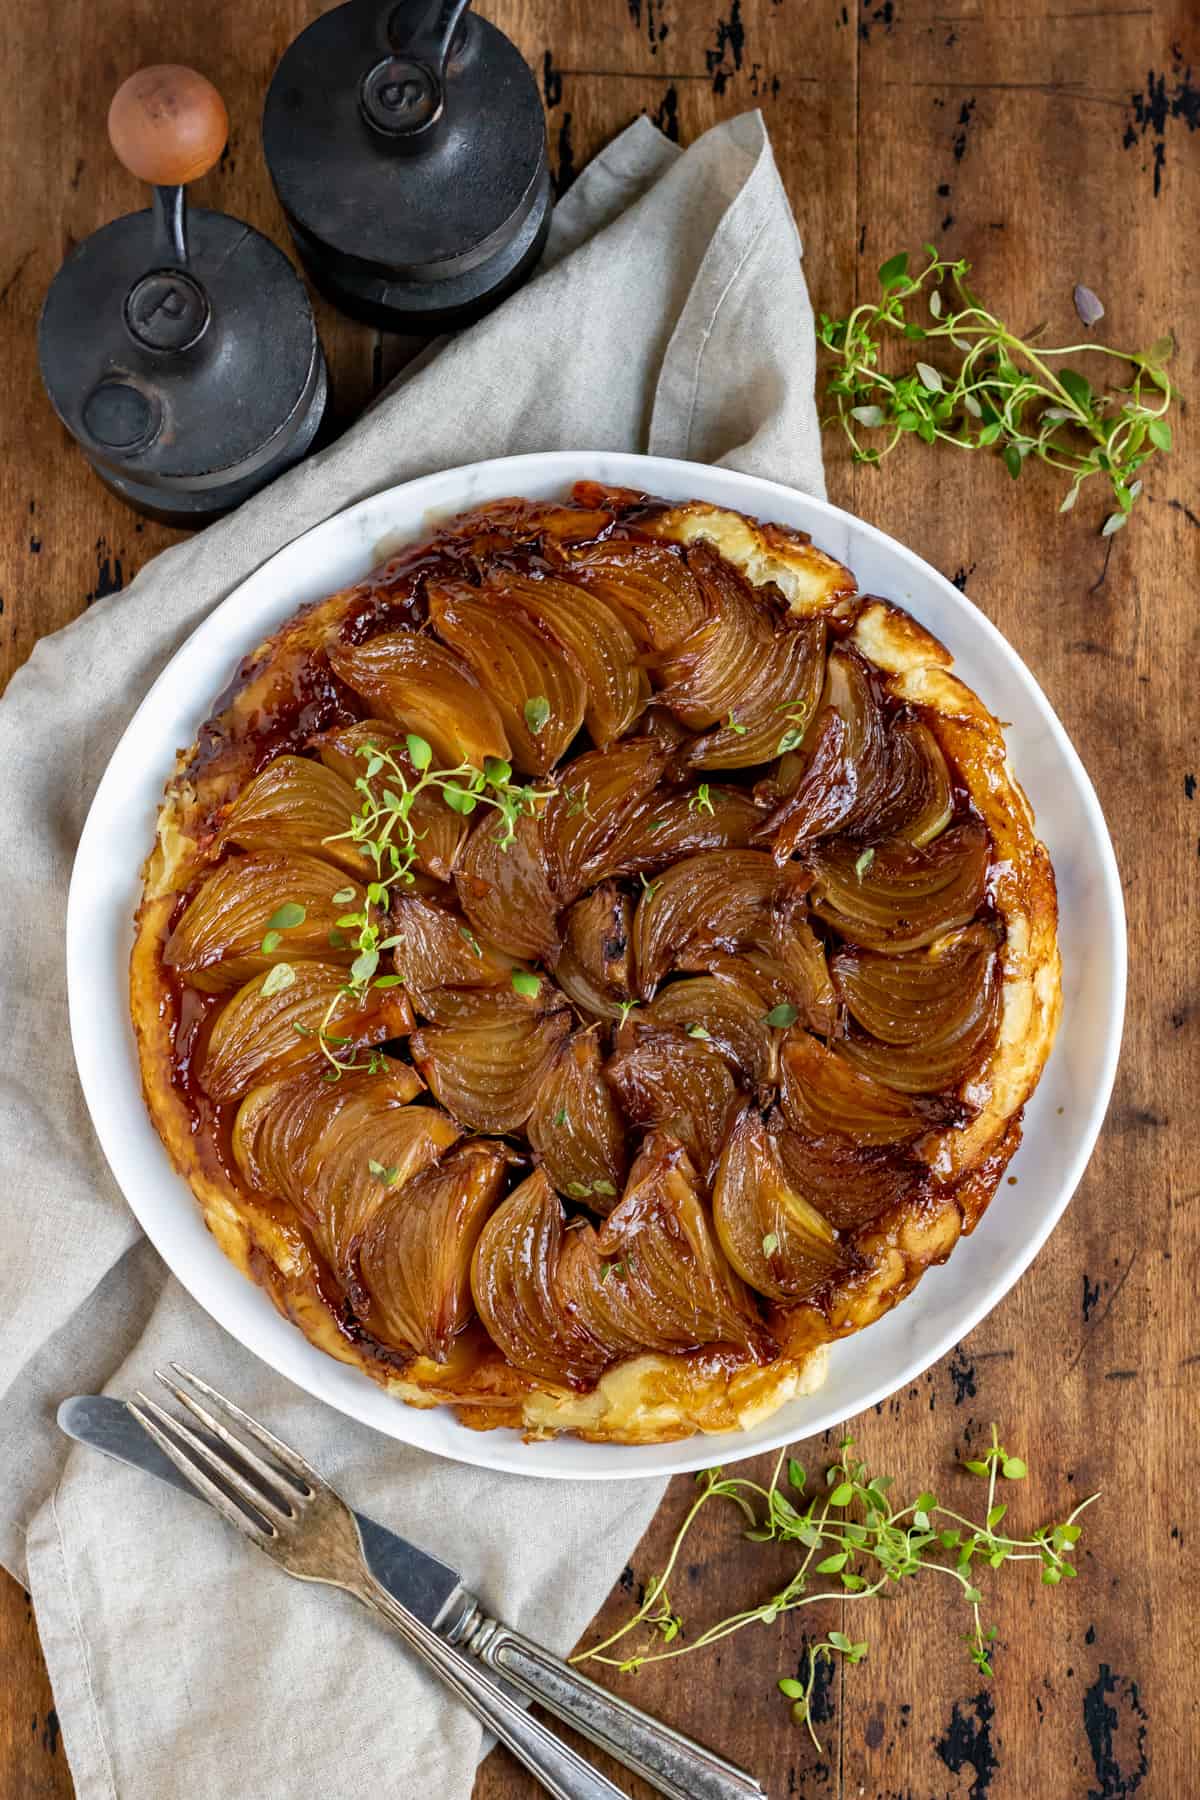 Wooden table with an onion tart.